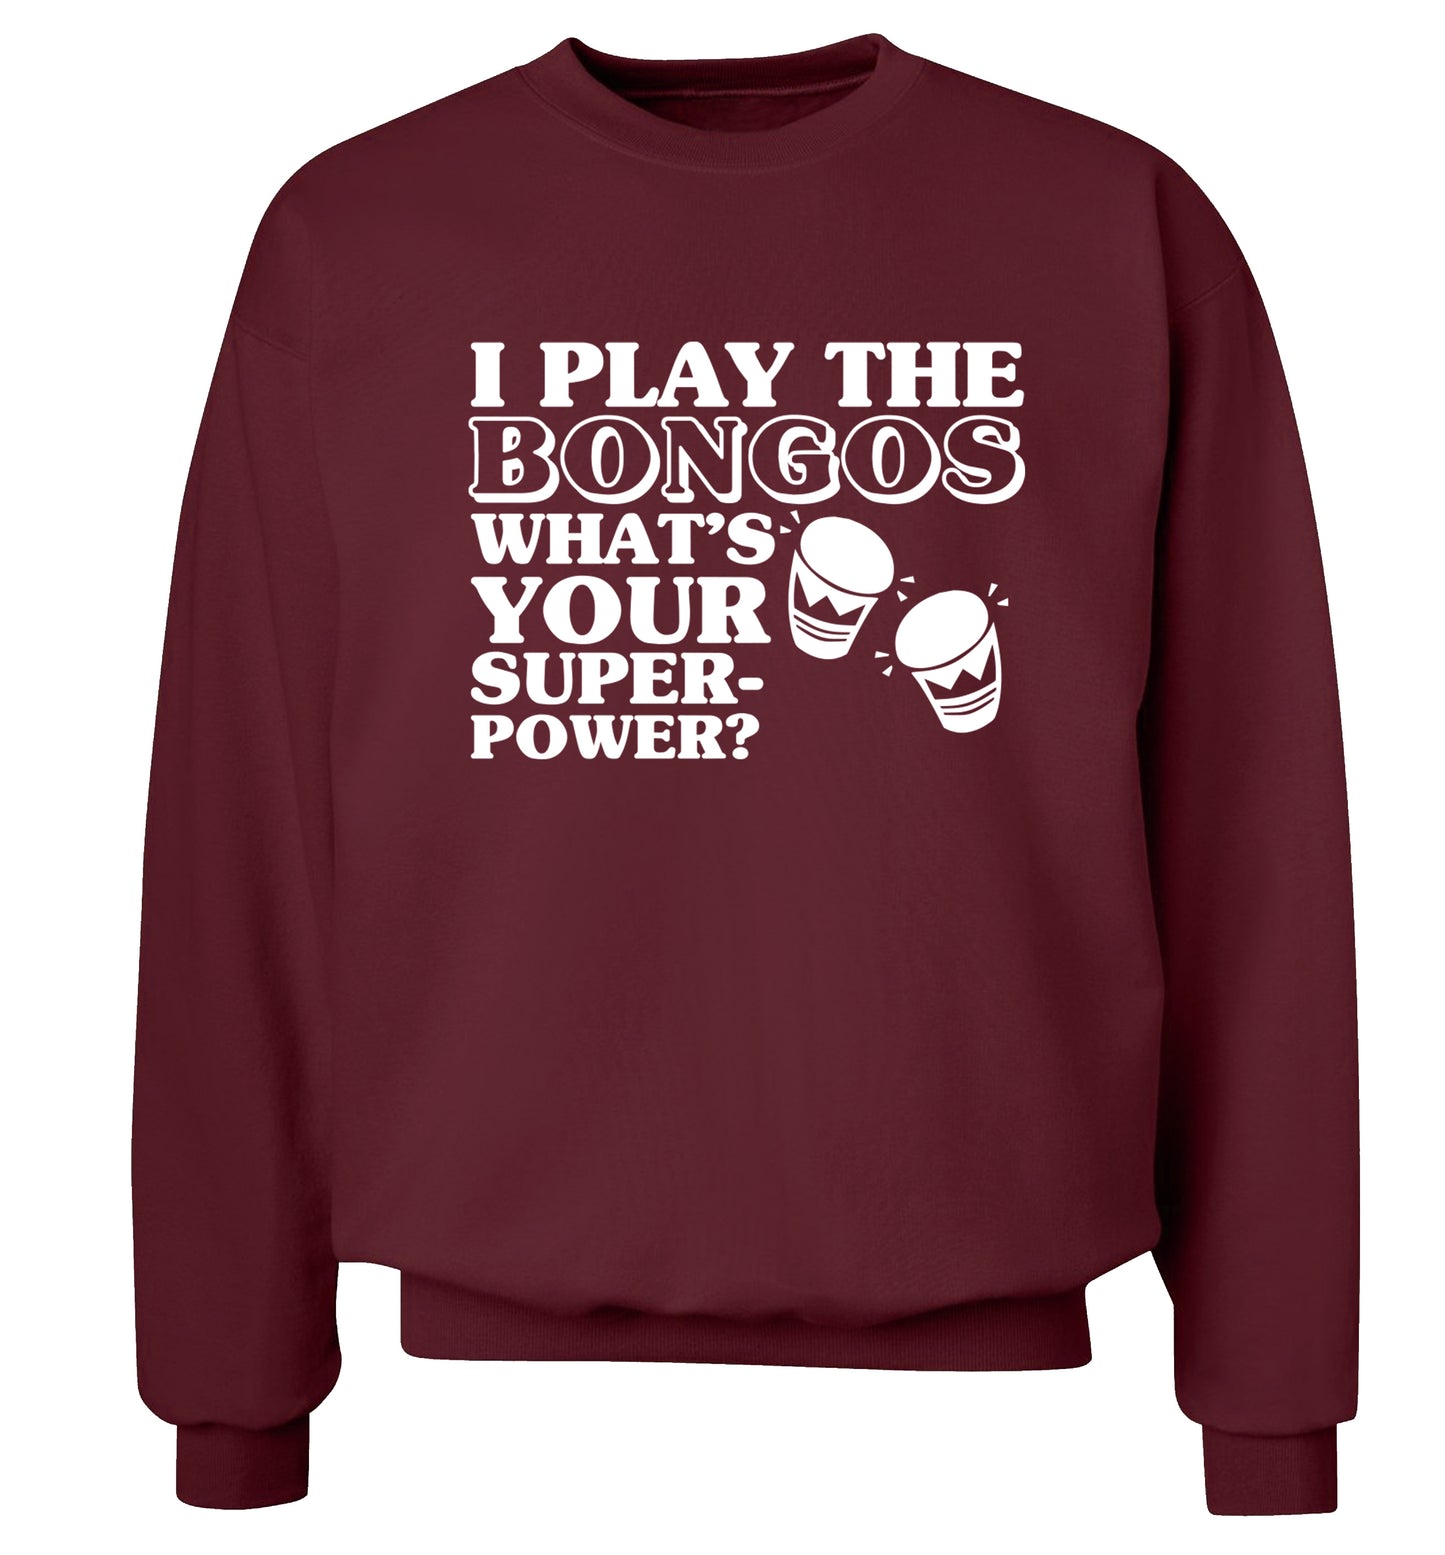 I play the bongos what's your superpower? Adult's unisexmaroon Sweater 2XL